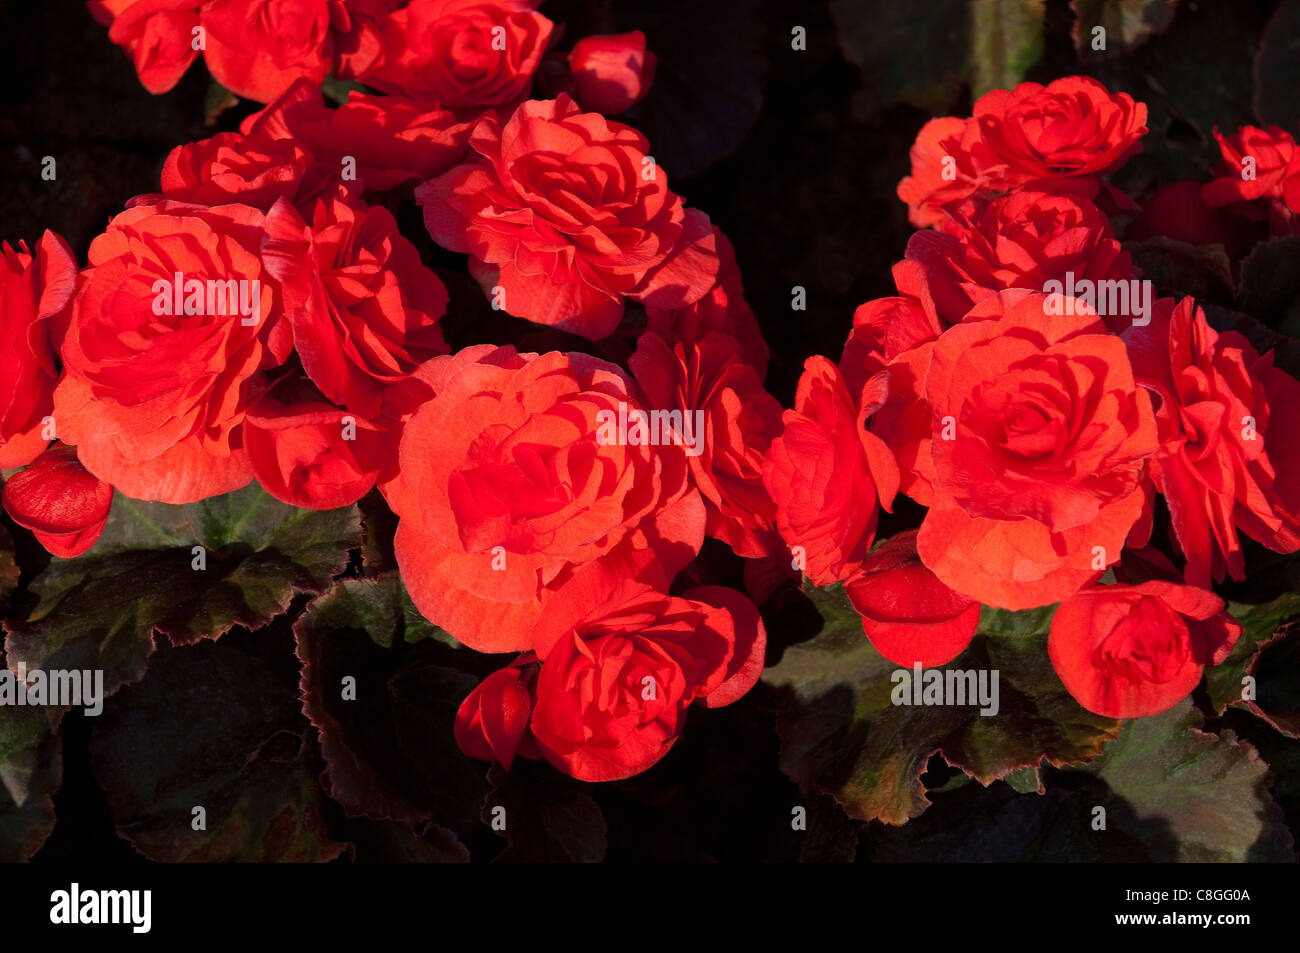 Solenia Begonia (Begonia Solenia Red Improved), red flowers. Stock Photo